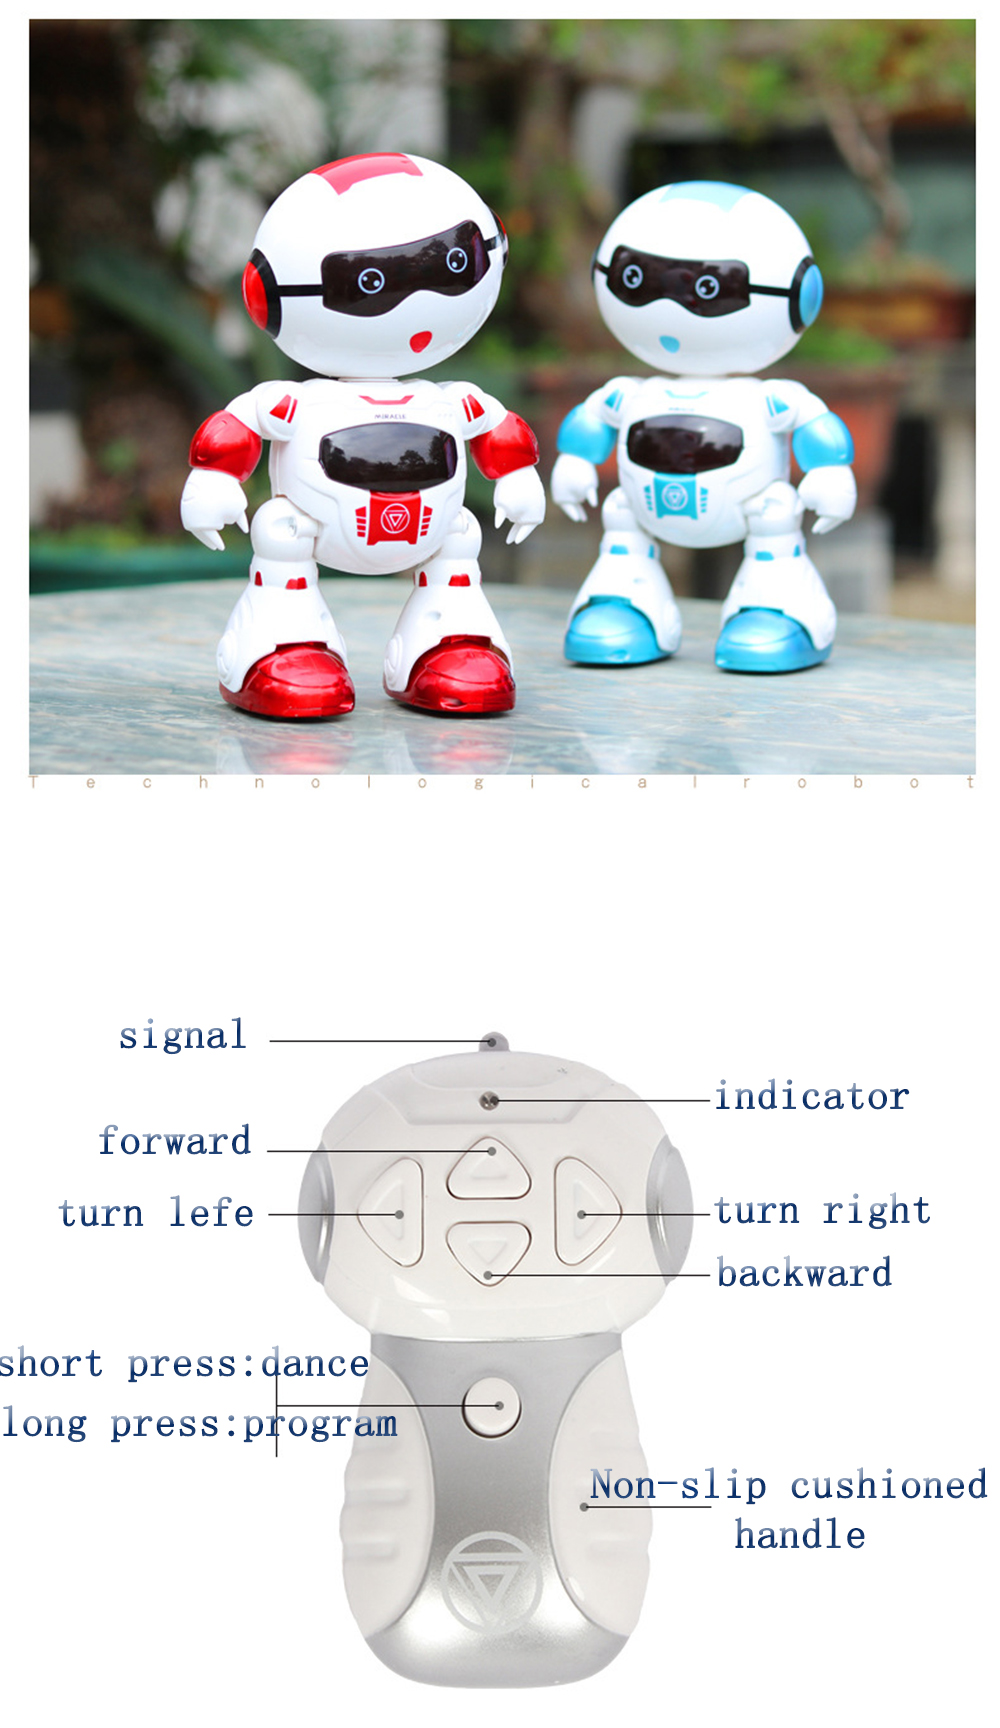 LeZhou-Smart-Touch-Control-Programmable-Voice-Interaction-Sing-Dance-RC-Robot-Toy-Gift-For-Children-1521513-9